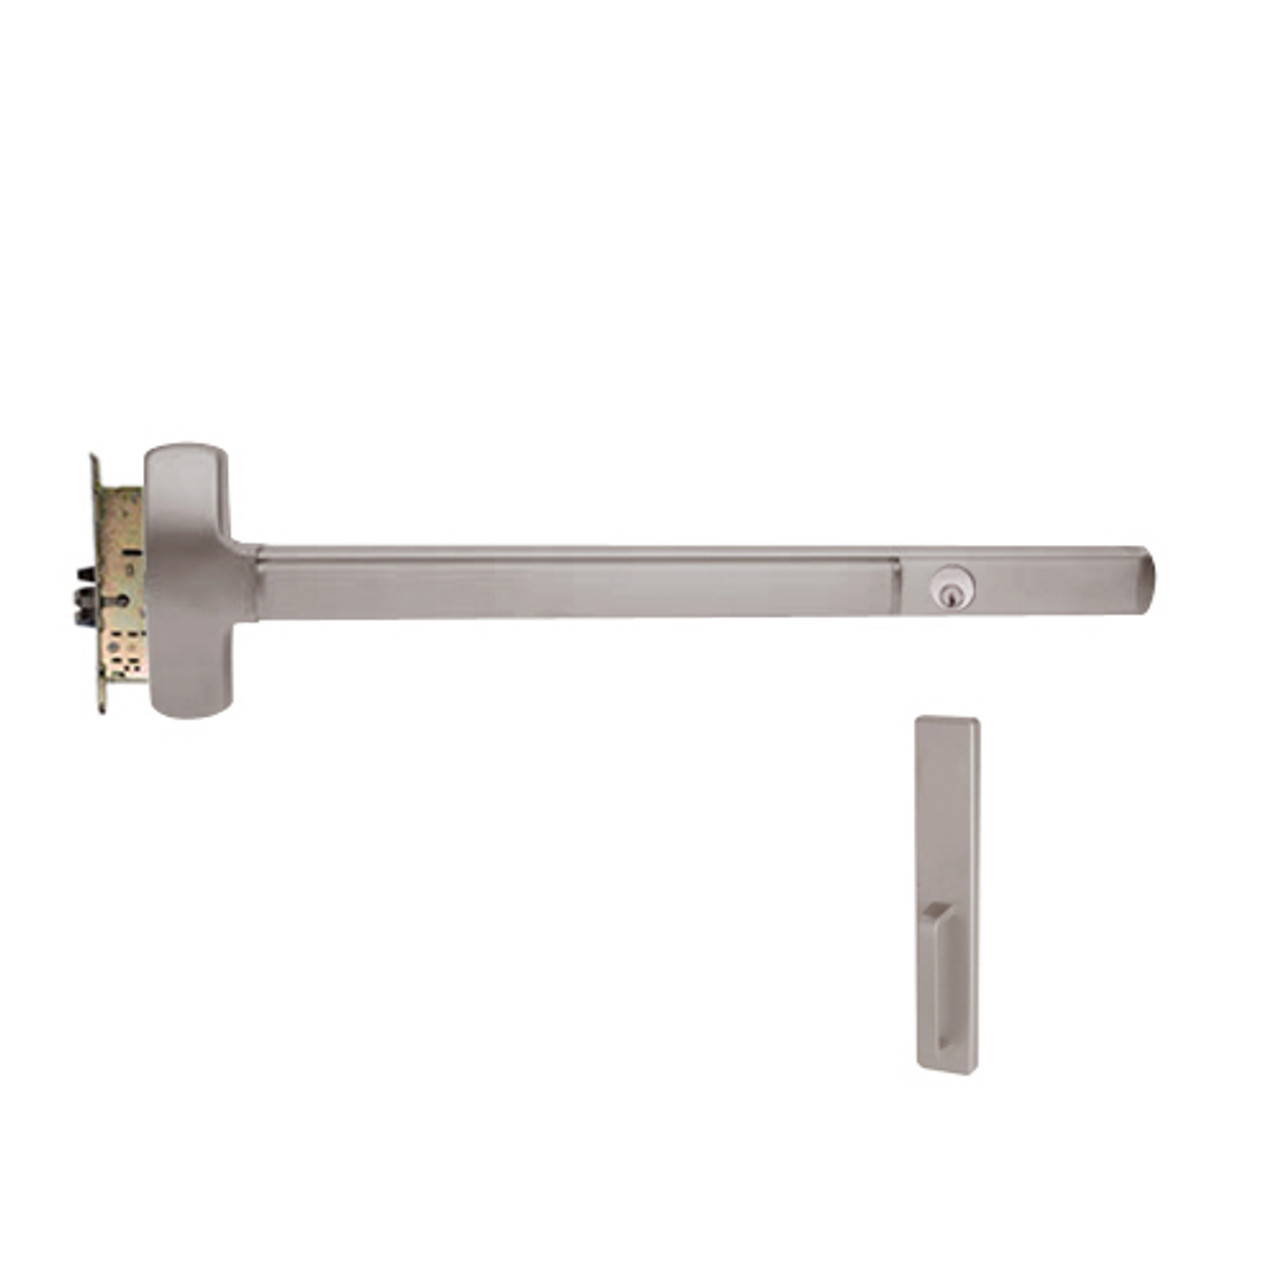 CD25-M-DT-US28-4-LHR Falcon Exit Device in Anodized Aluminum